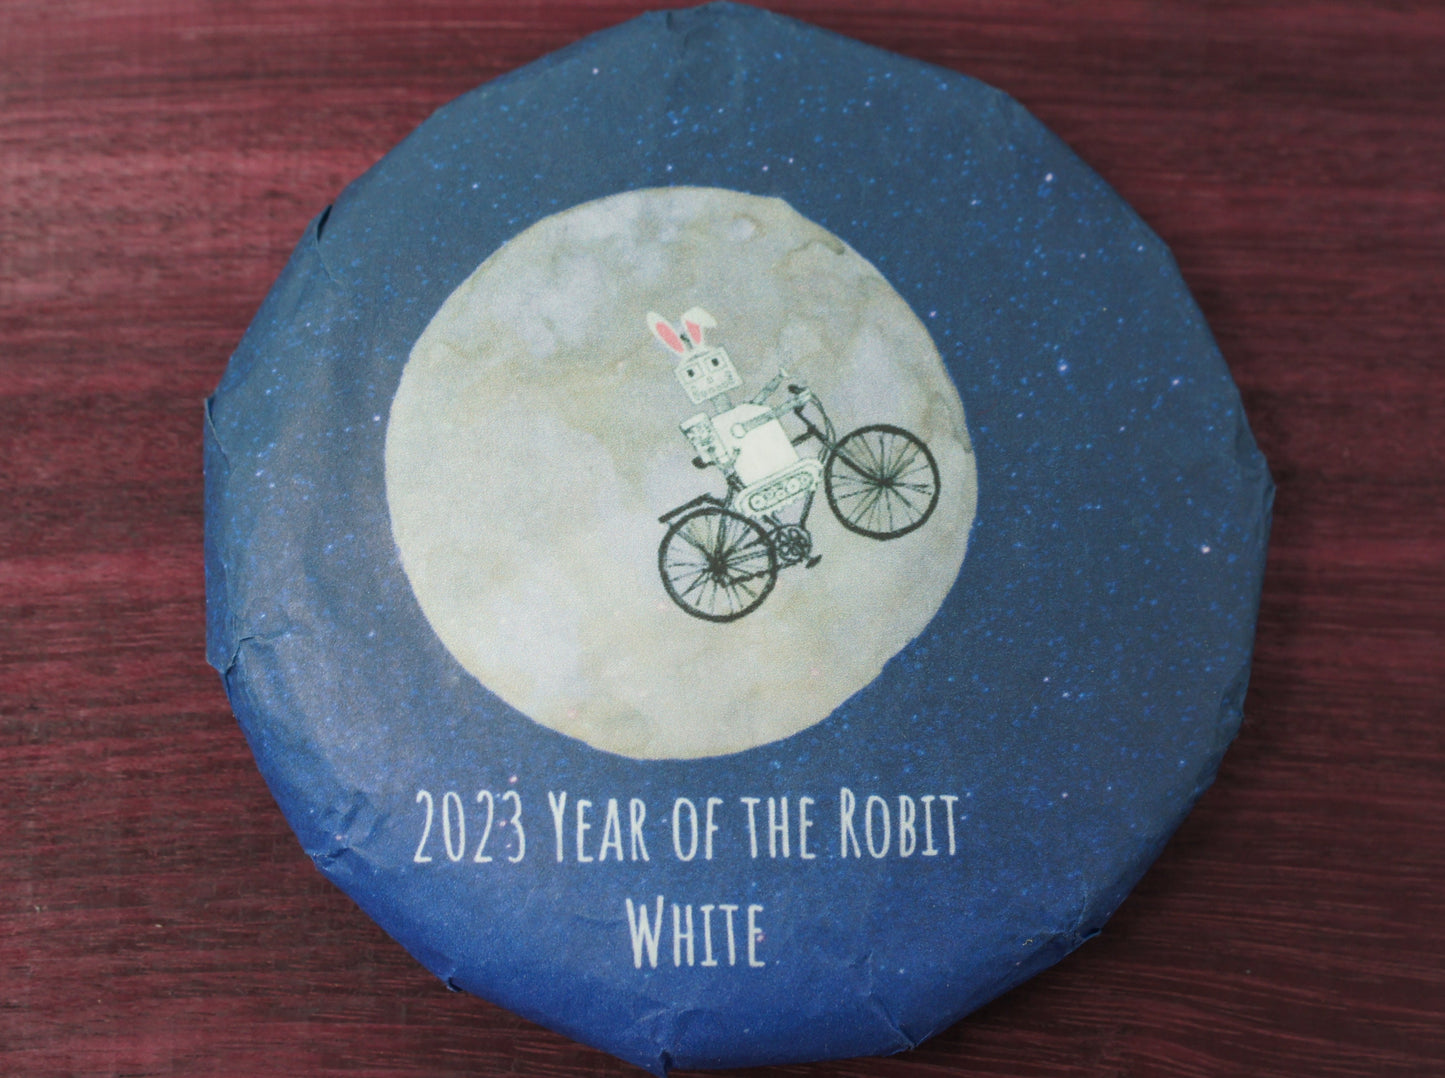 2023 Year of the Robit White 100g cake